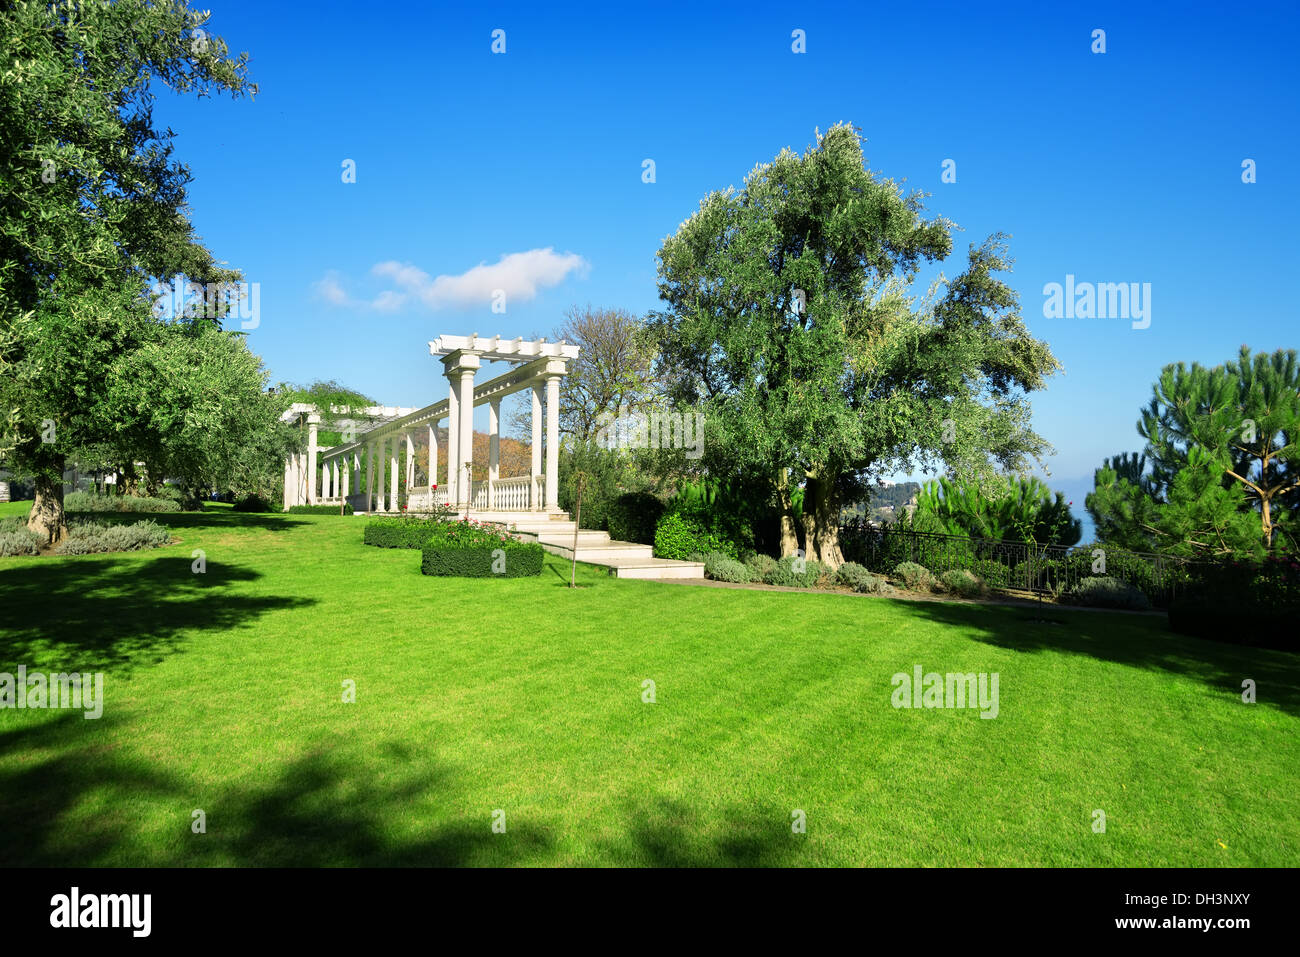 White balustrade with columns in a city park Stock Photo